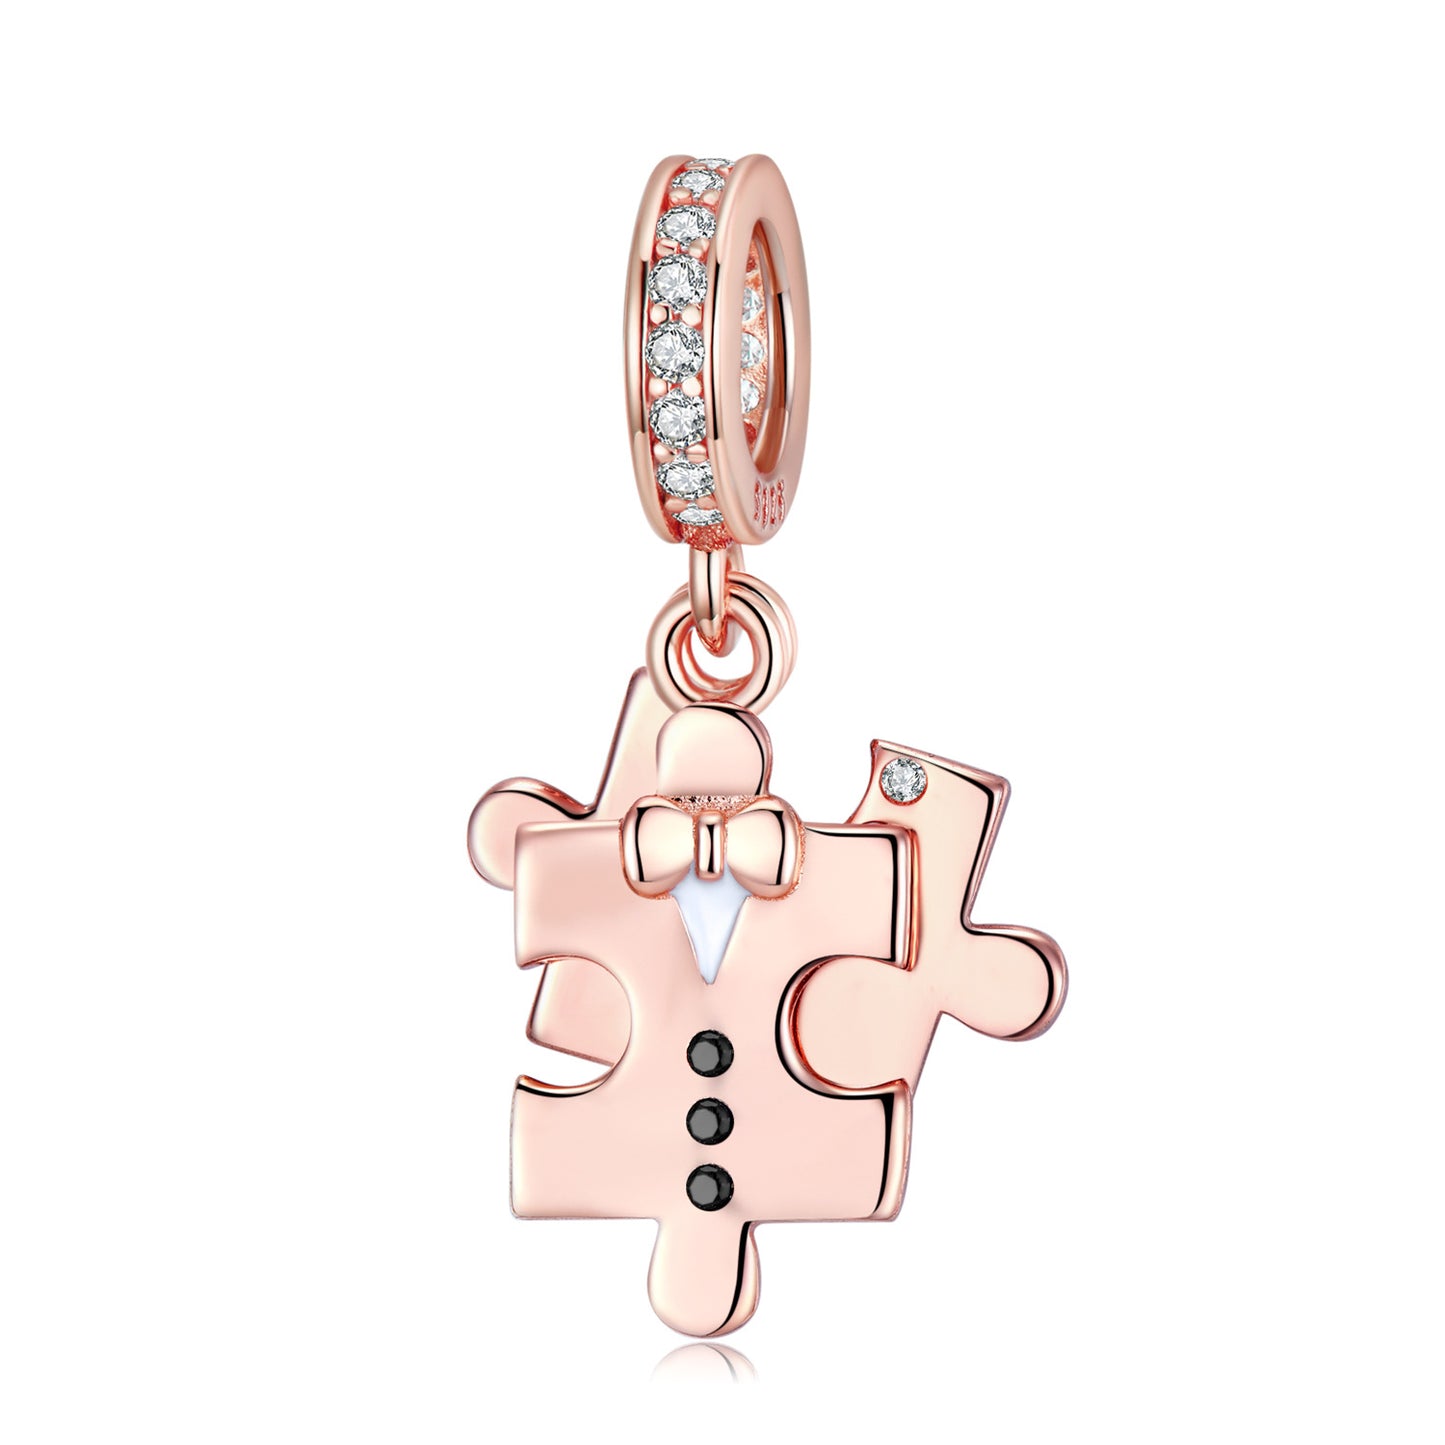 Found the Missing Piece Jigsaw Pendant Rose Gold Plated Valentine's Day Gift